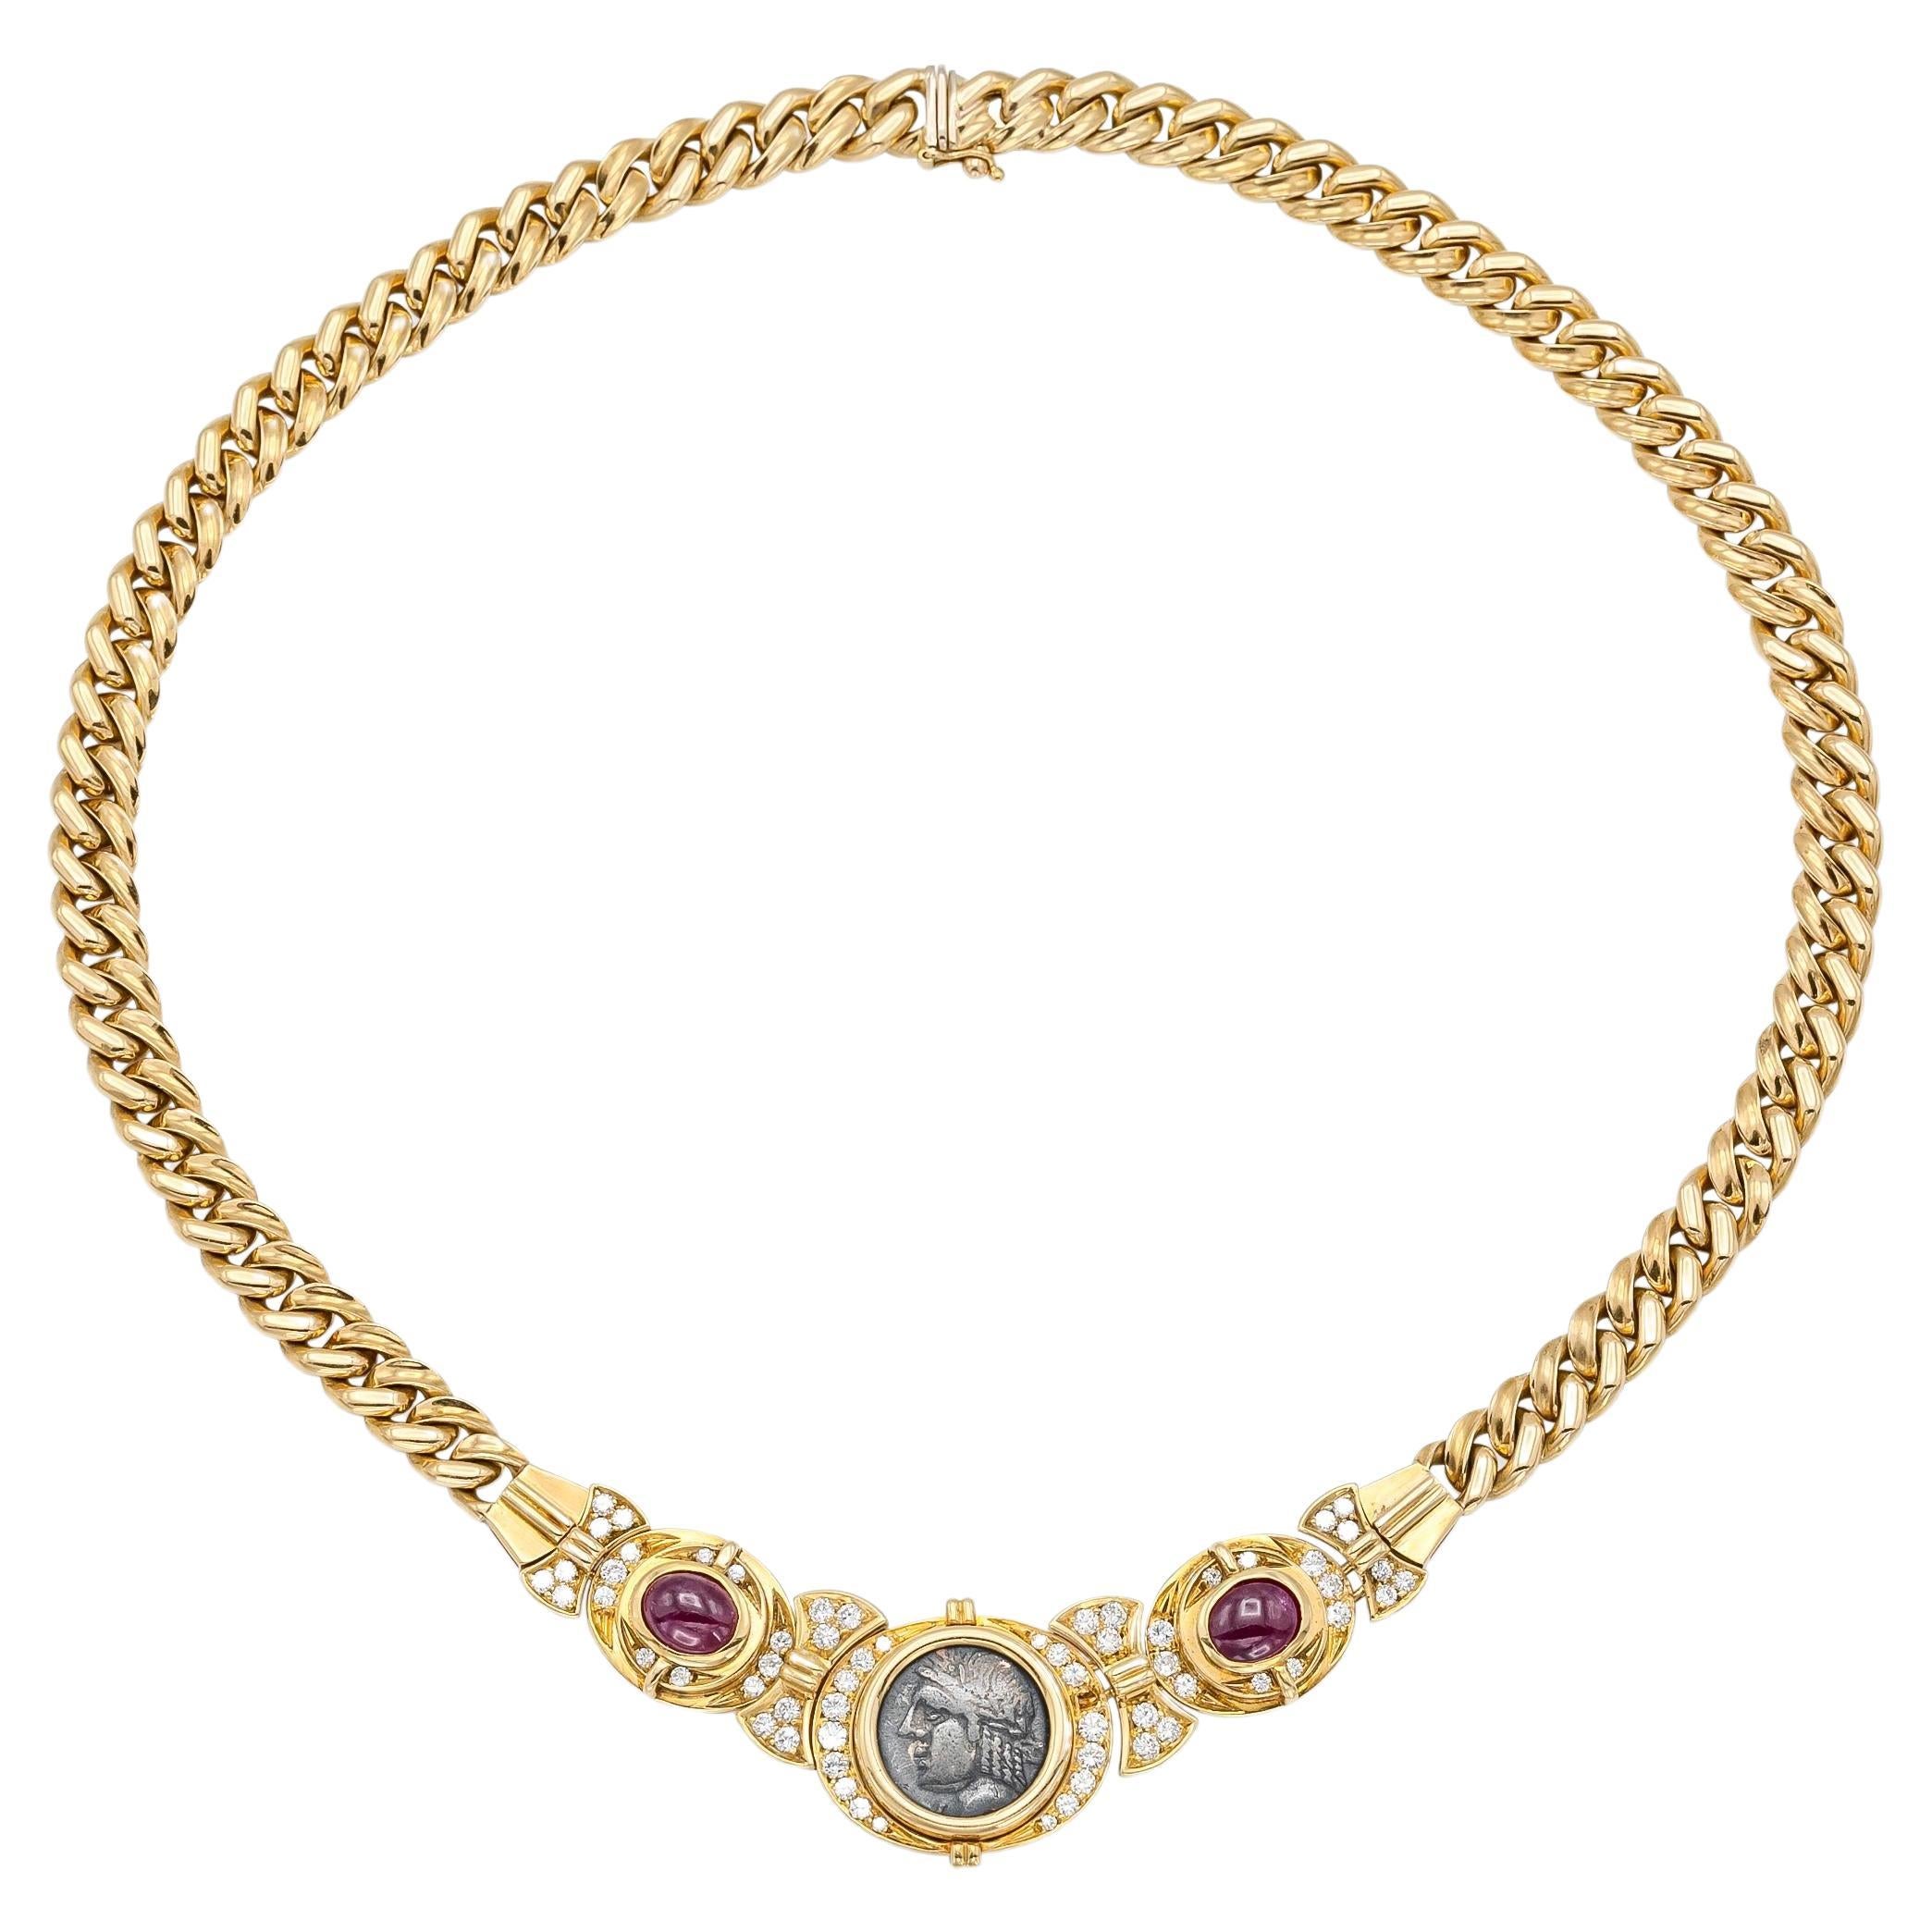 Vintage 1970s Bvlgari Monete Roman Coin Necklace with Rubies and Diamonds